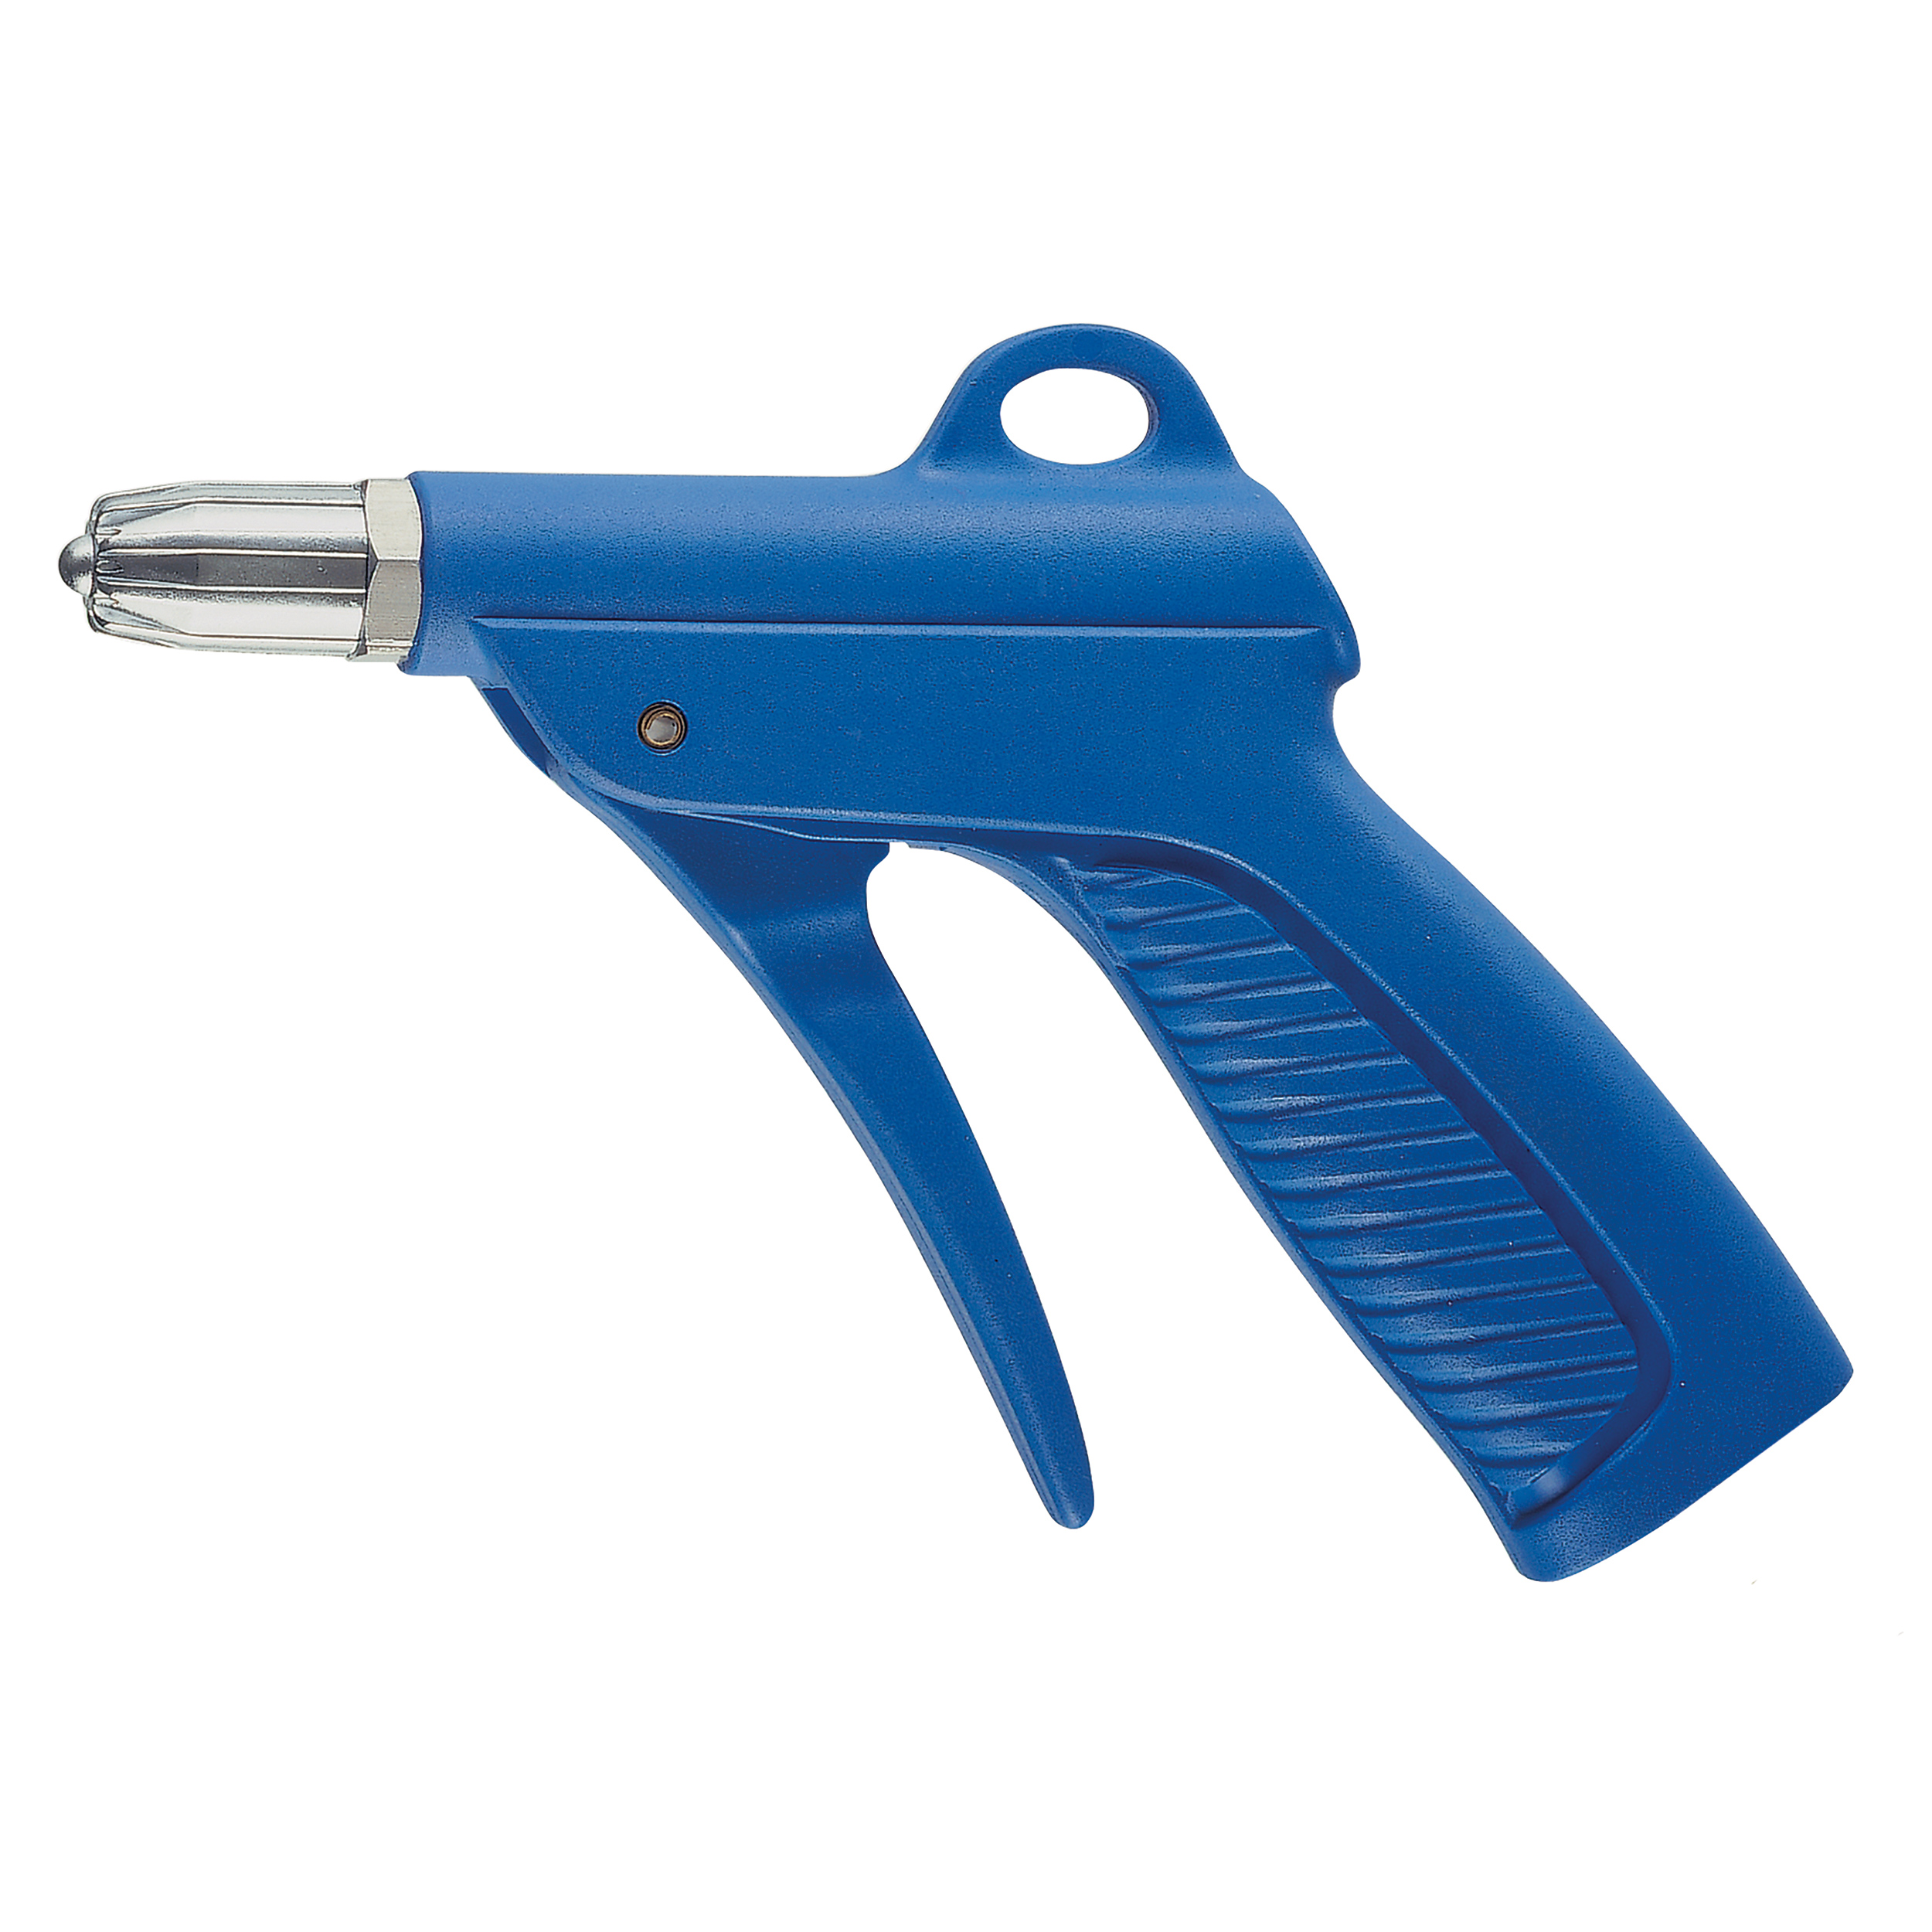 Blow gun, plastic, safety and noise reducing noz. blowstar